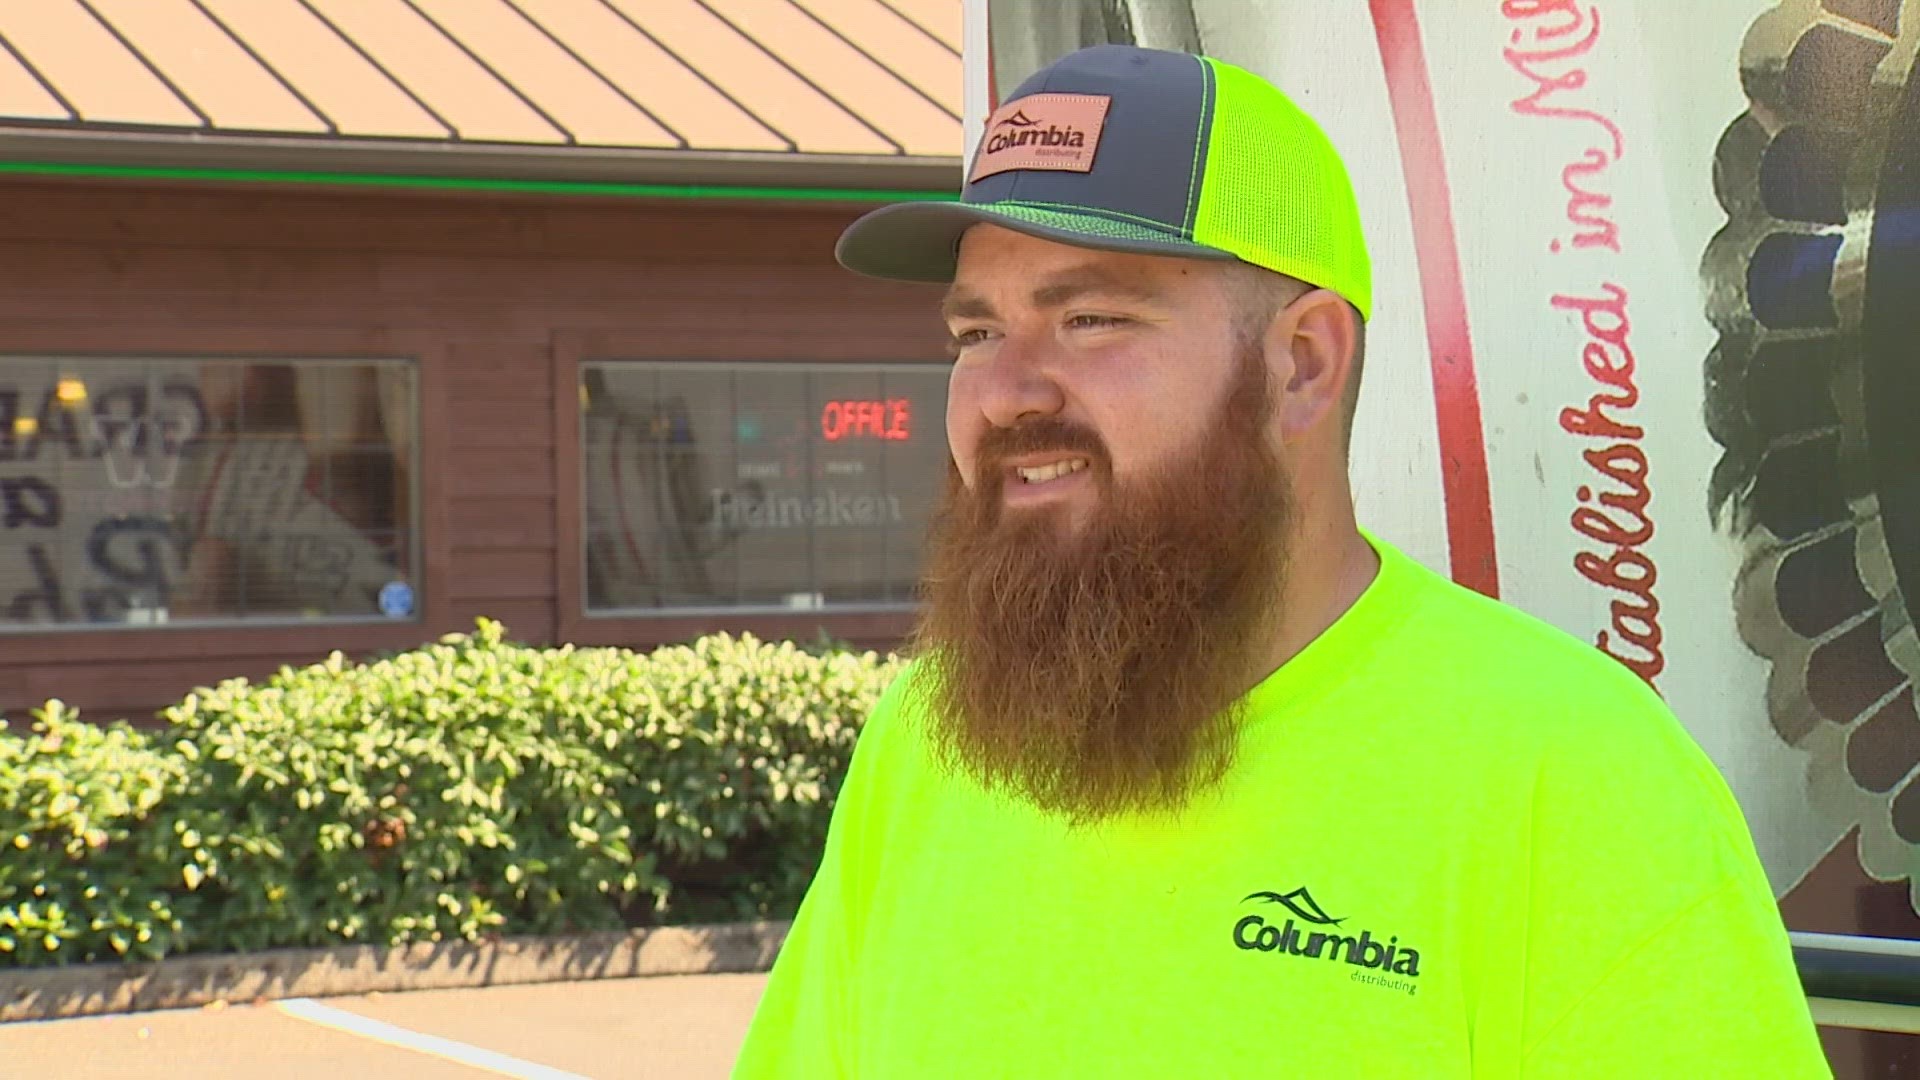 Delivery man stays with lost boy walking around Olympia gas station, helps him reunite with his mom king5